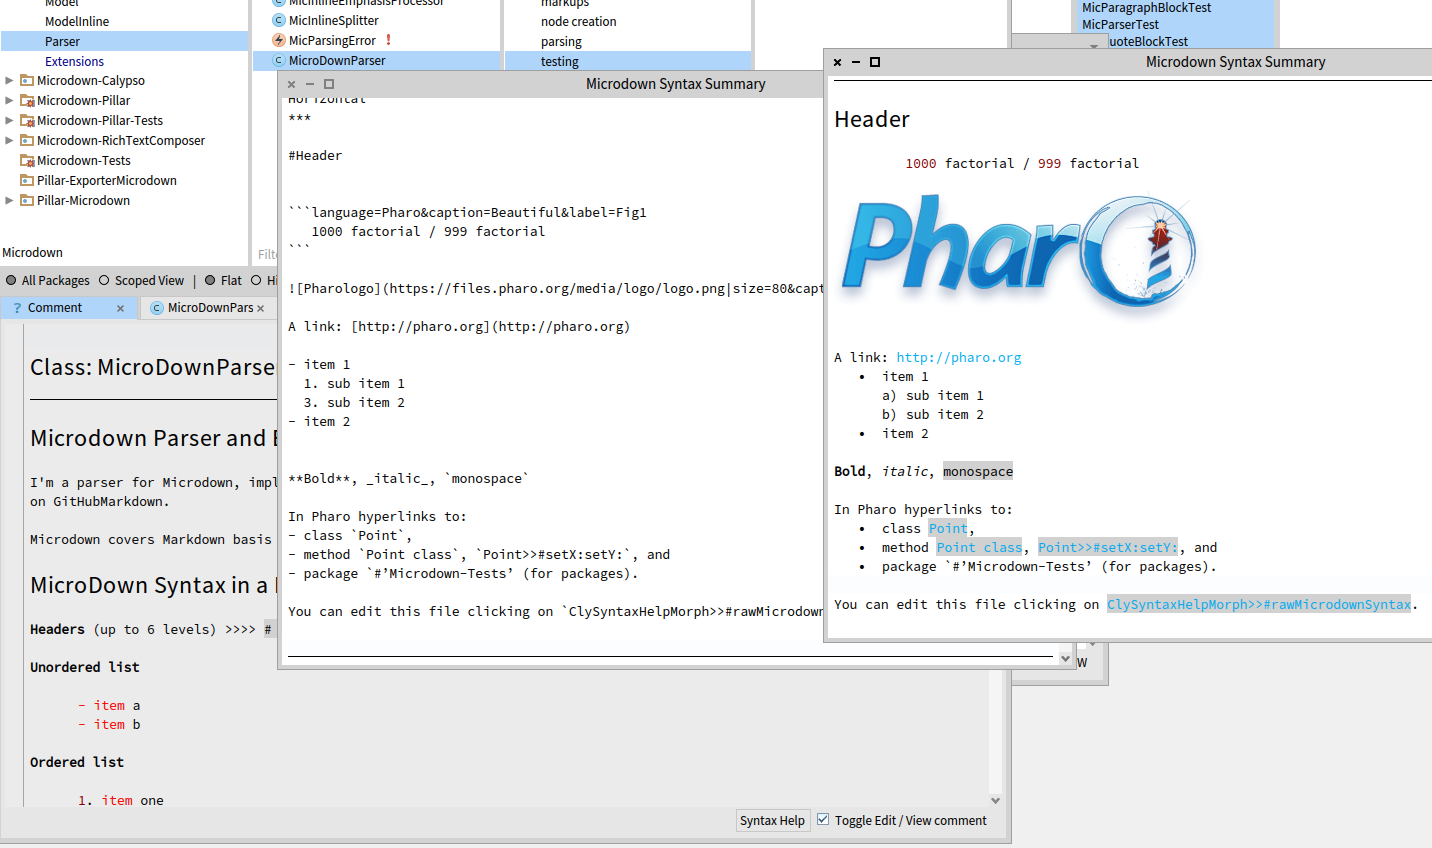 Microdown within the Pharo IDE.